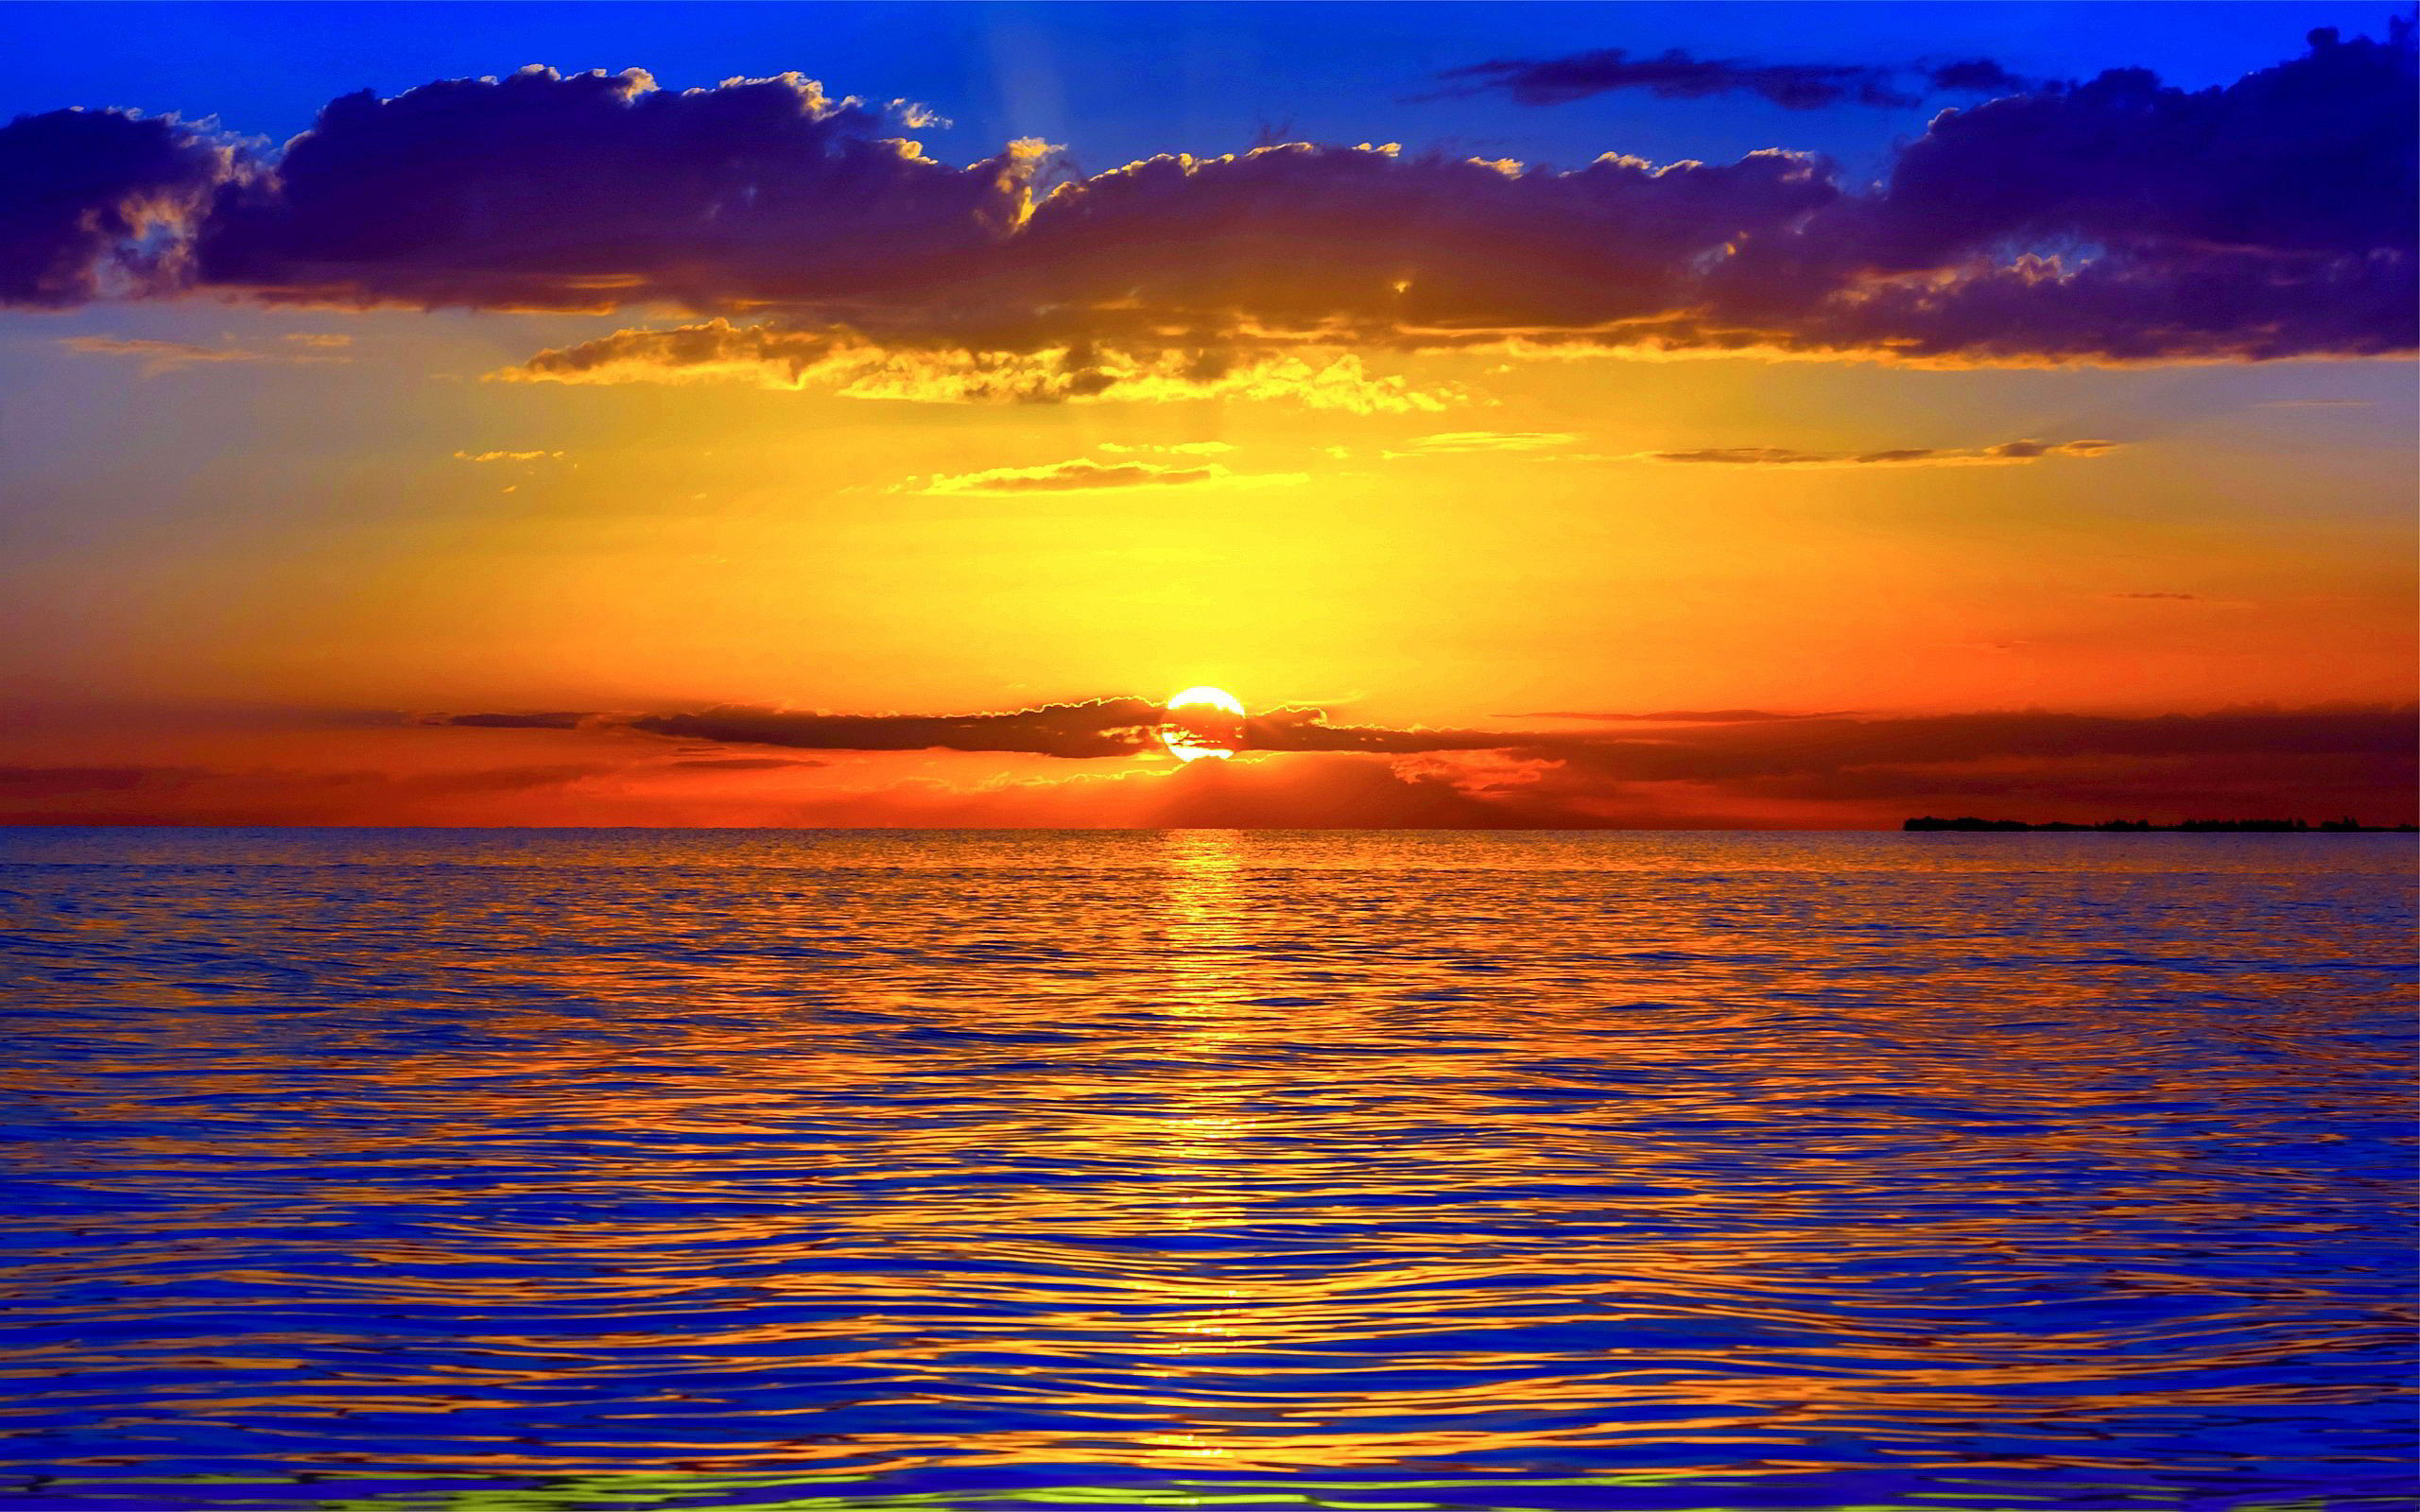 2560x1600 Ocean Image For Desktop Wallpaper 2560 x 1600 px 1.2 MB mermaid coral reef  sunset dolphin